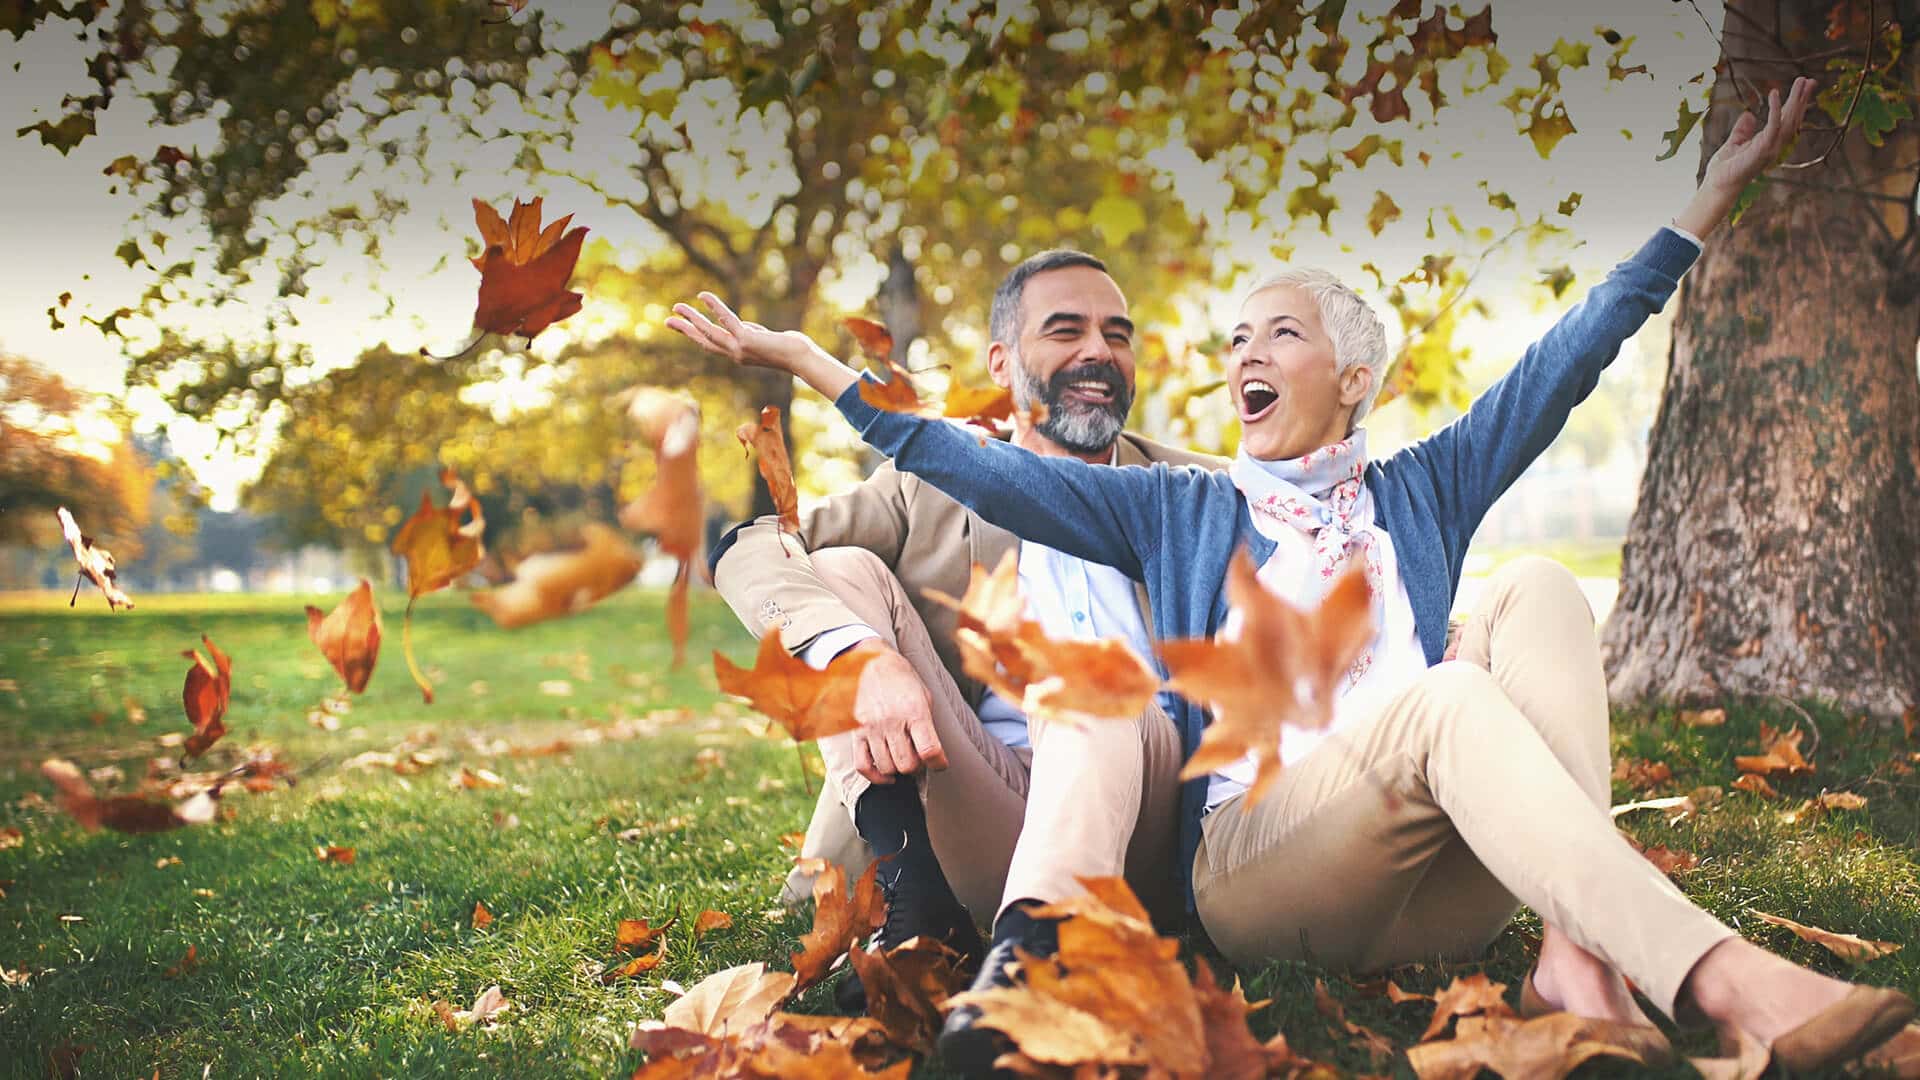 Dating over 50 symbolized by a happy man and woman sitting in the meadow of a park